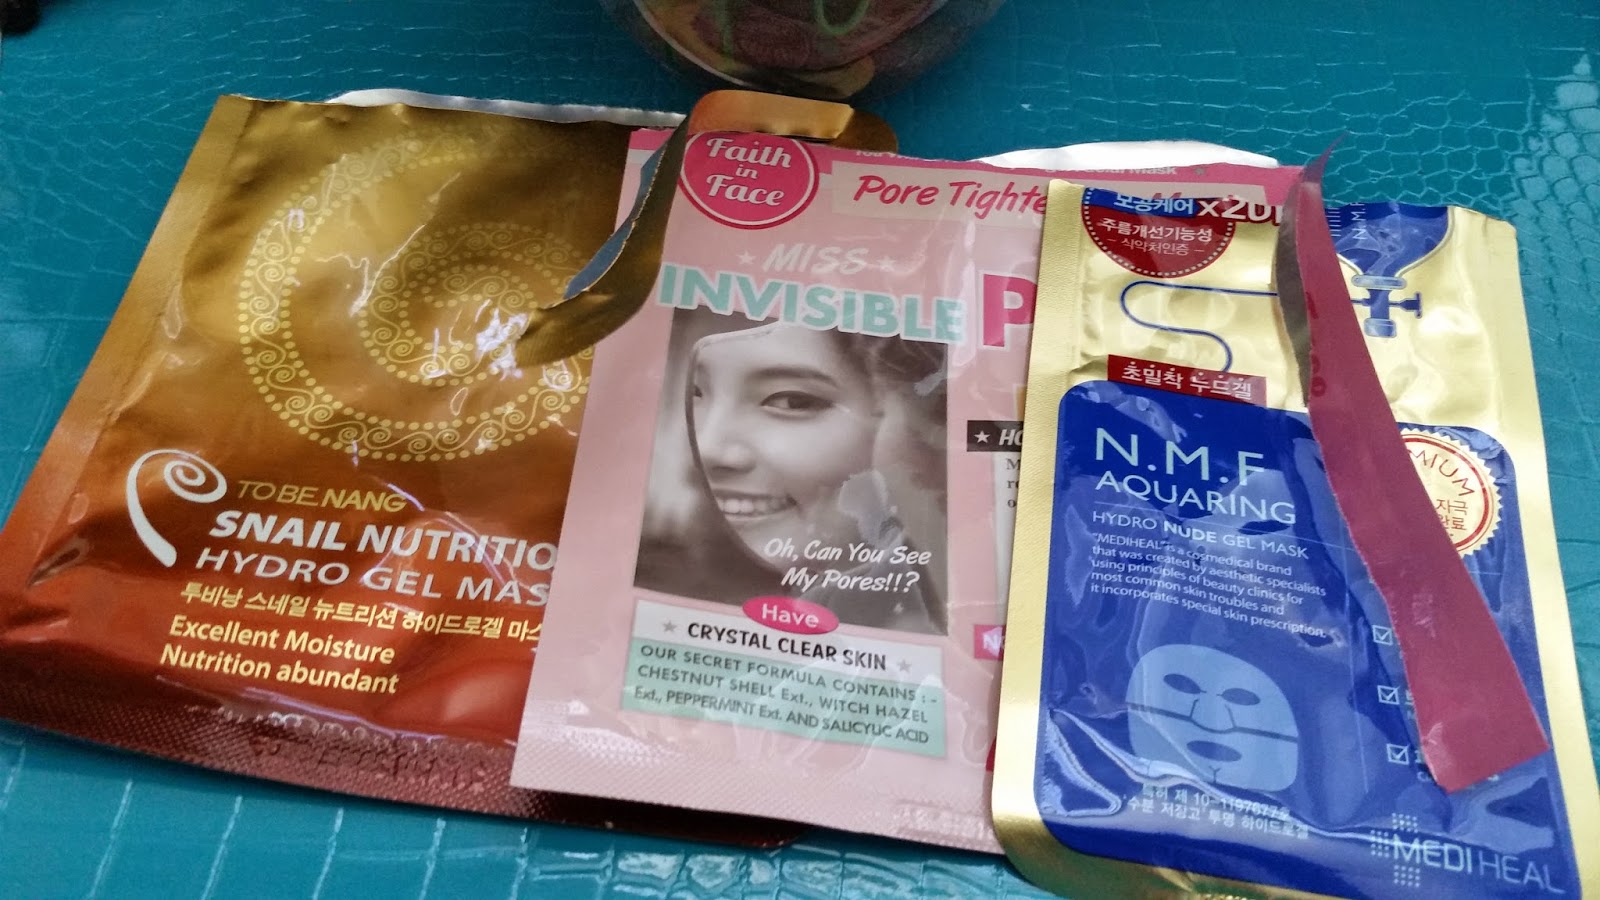 To Be Nang Snail Nutrition Hydro Gel Mask Faith In Face Miss Invisible Pore Hydro Gel Mask Mediheal N.M.F Aquaring Hydro Nude Gel Mask